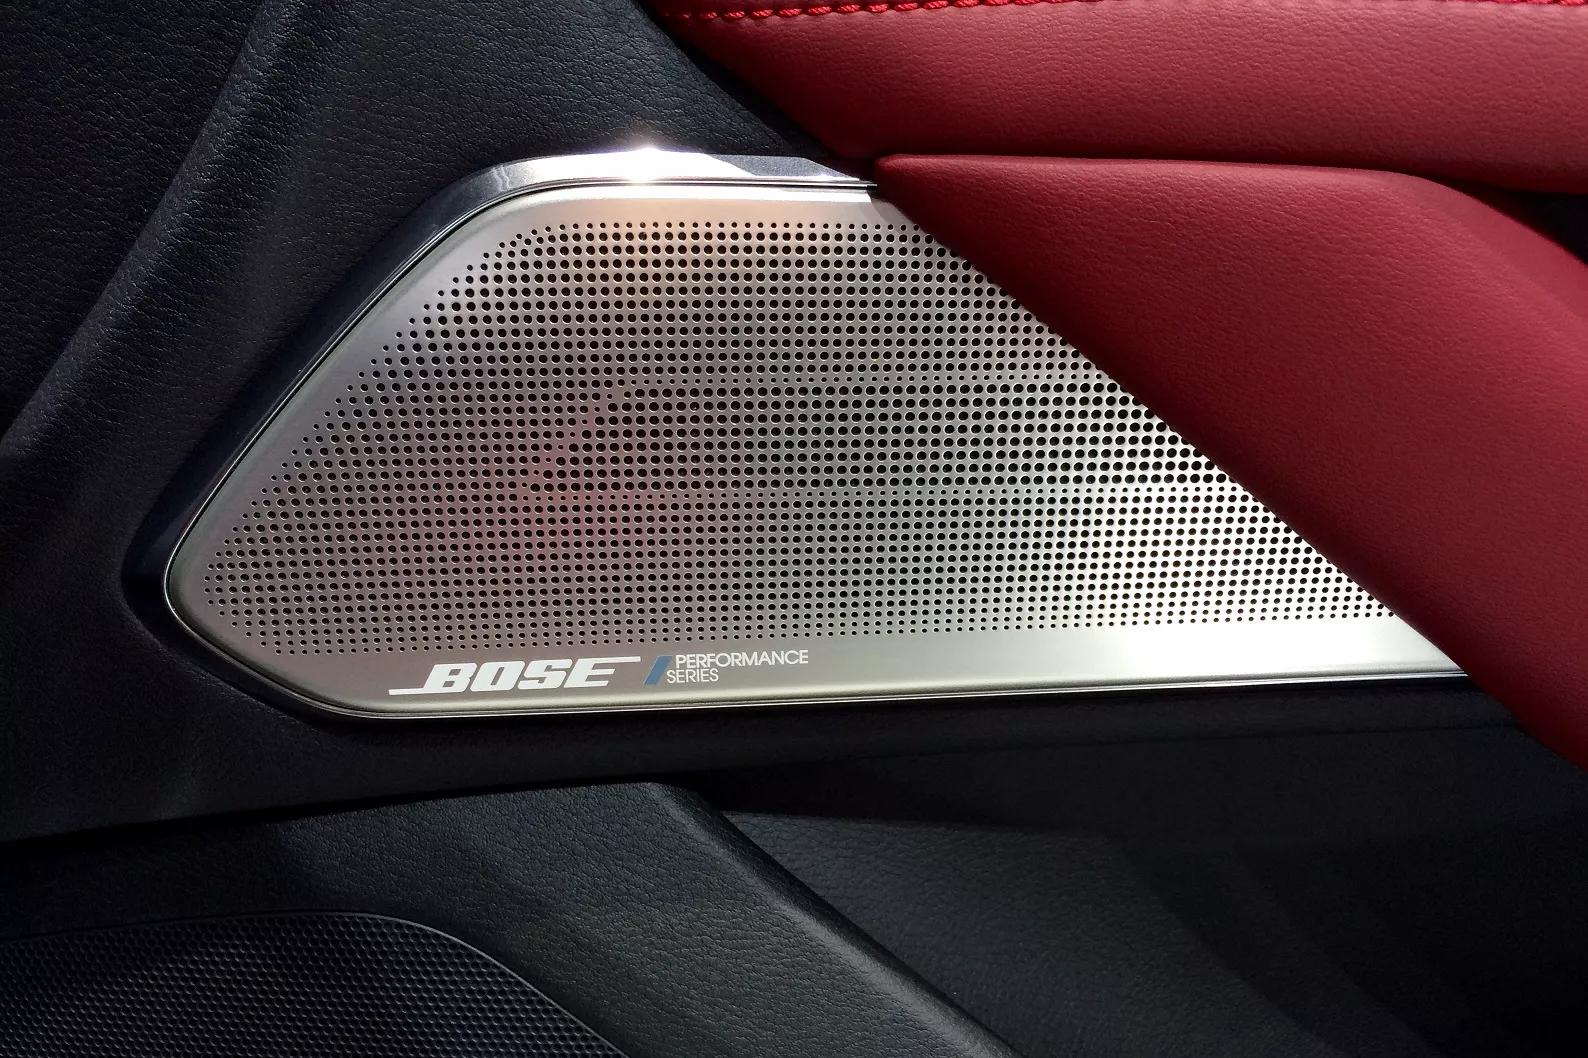 The Bose Performance Series sound system for the 2017 infiniti Q60